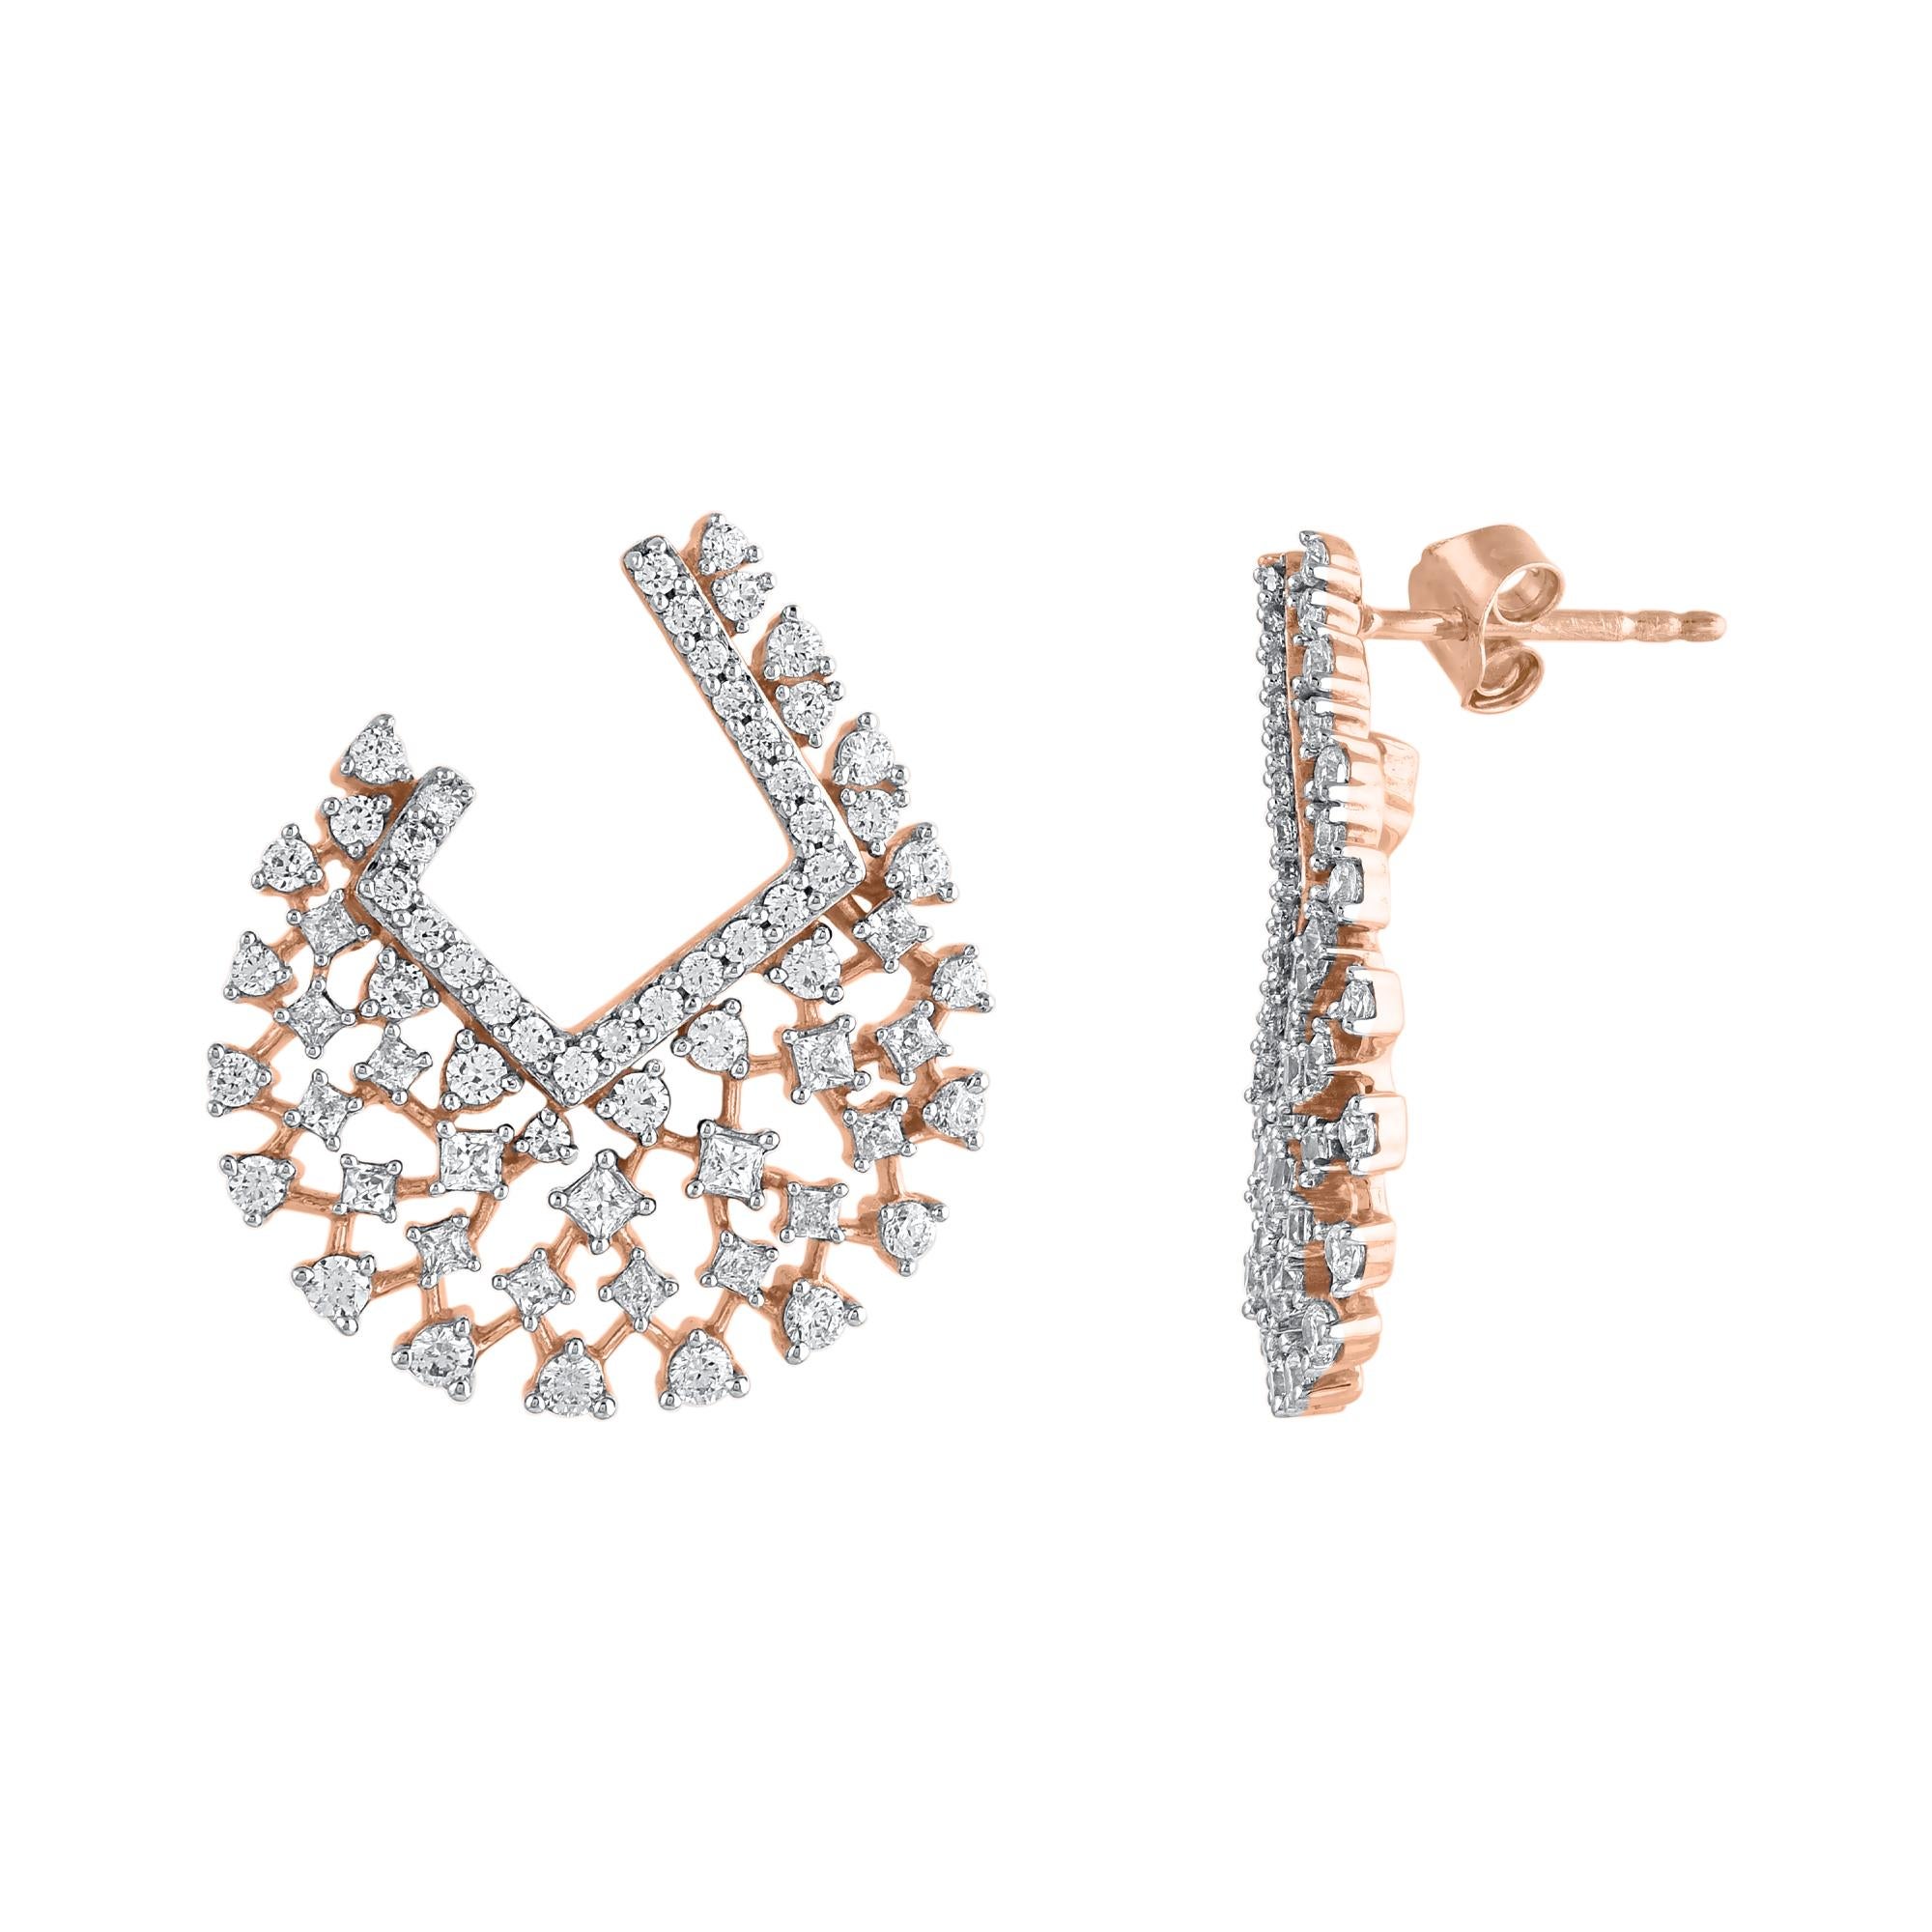 These shimmering and striking diamond stud earrings are perfect for yourself or for gifting to someone special. 
Crafted in 18 Karat Gold, earring is filled with 130 brilliant cut diamonds and princess cut diamond set in prong setting and shimmers